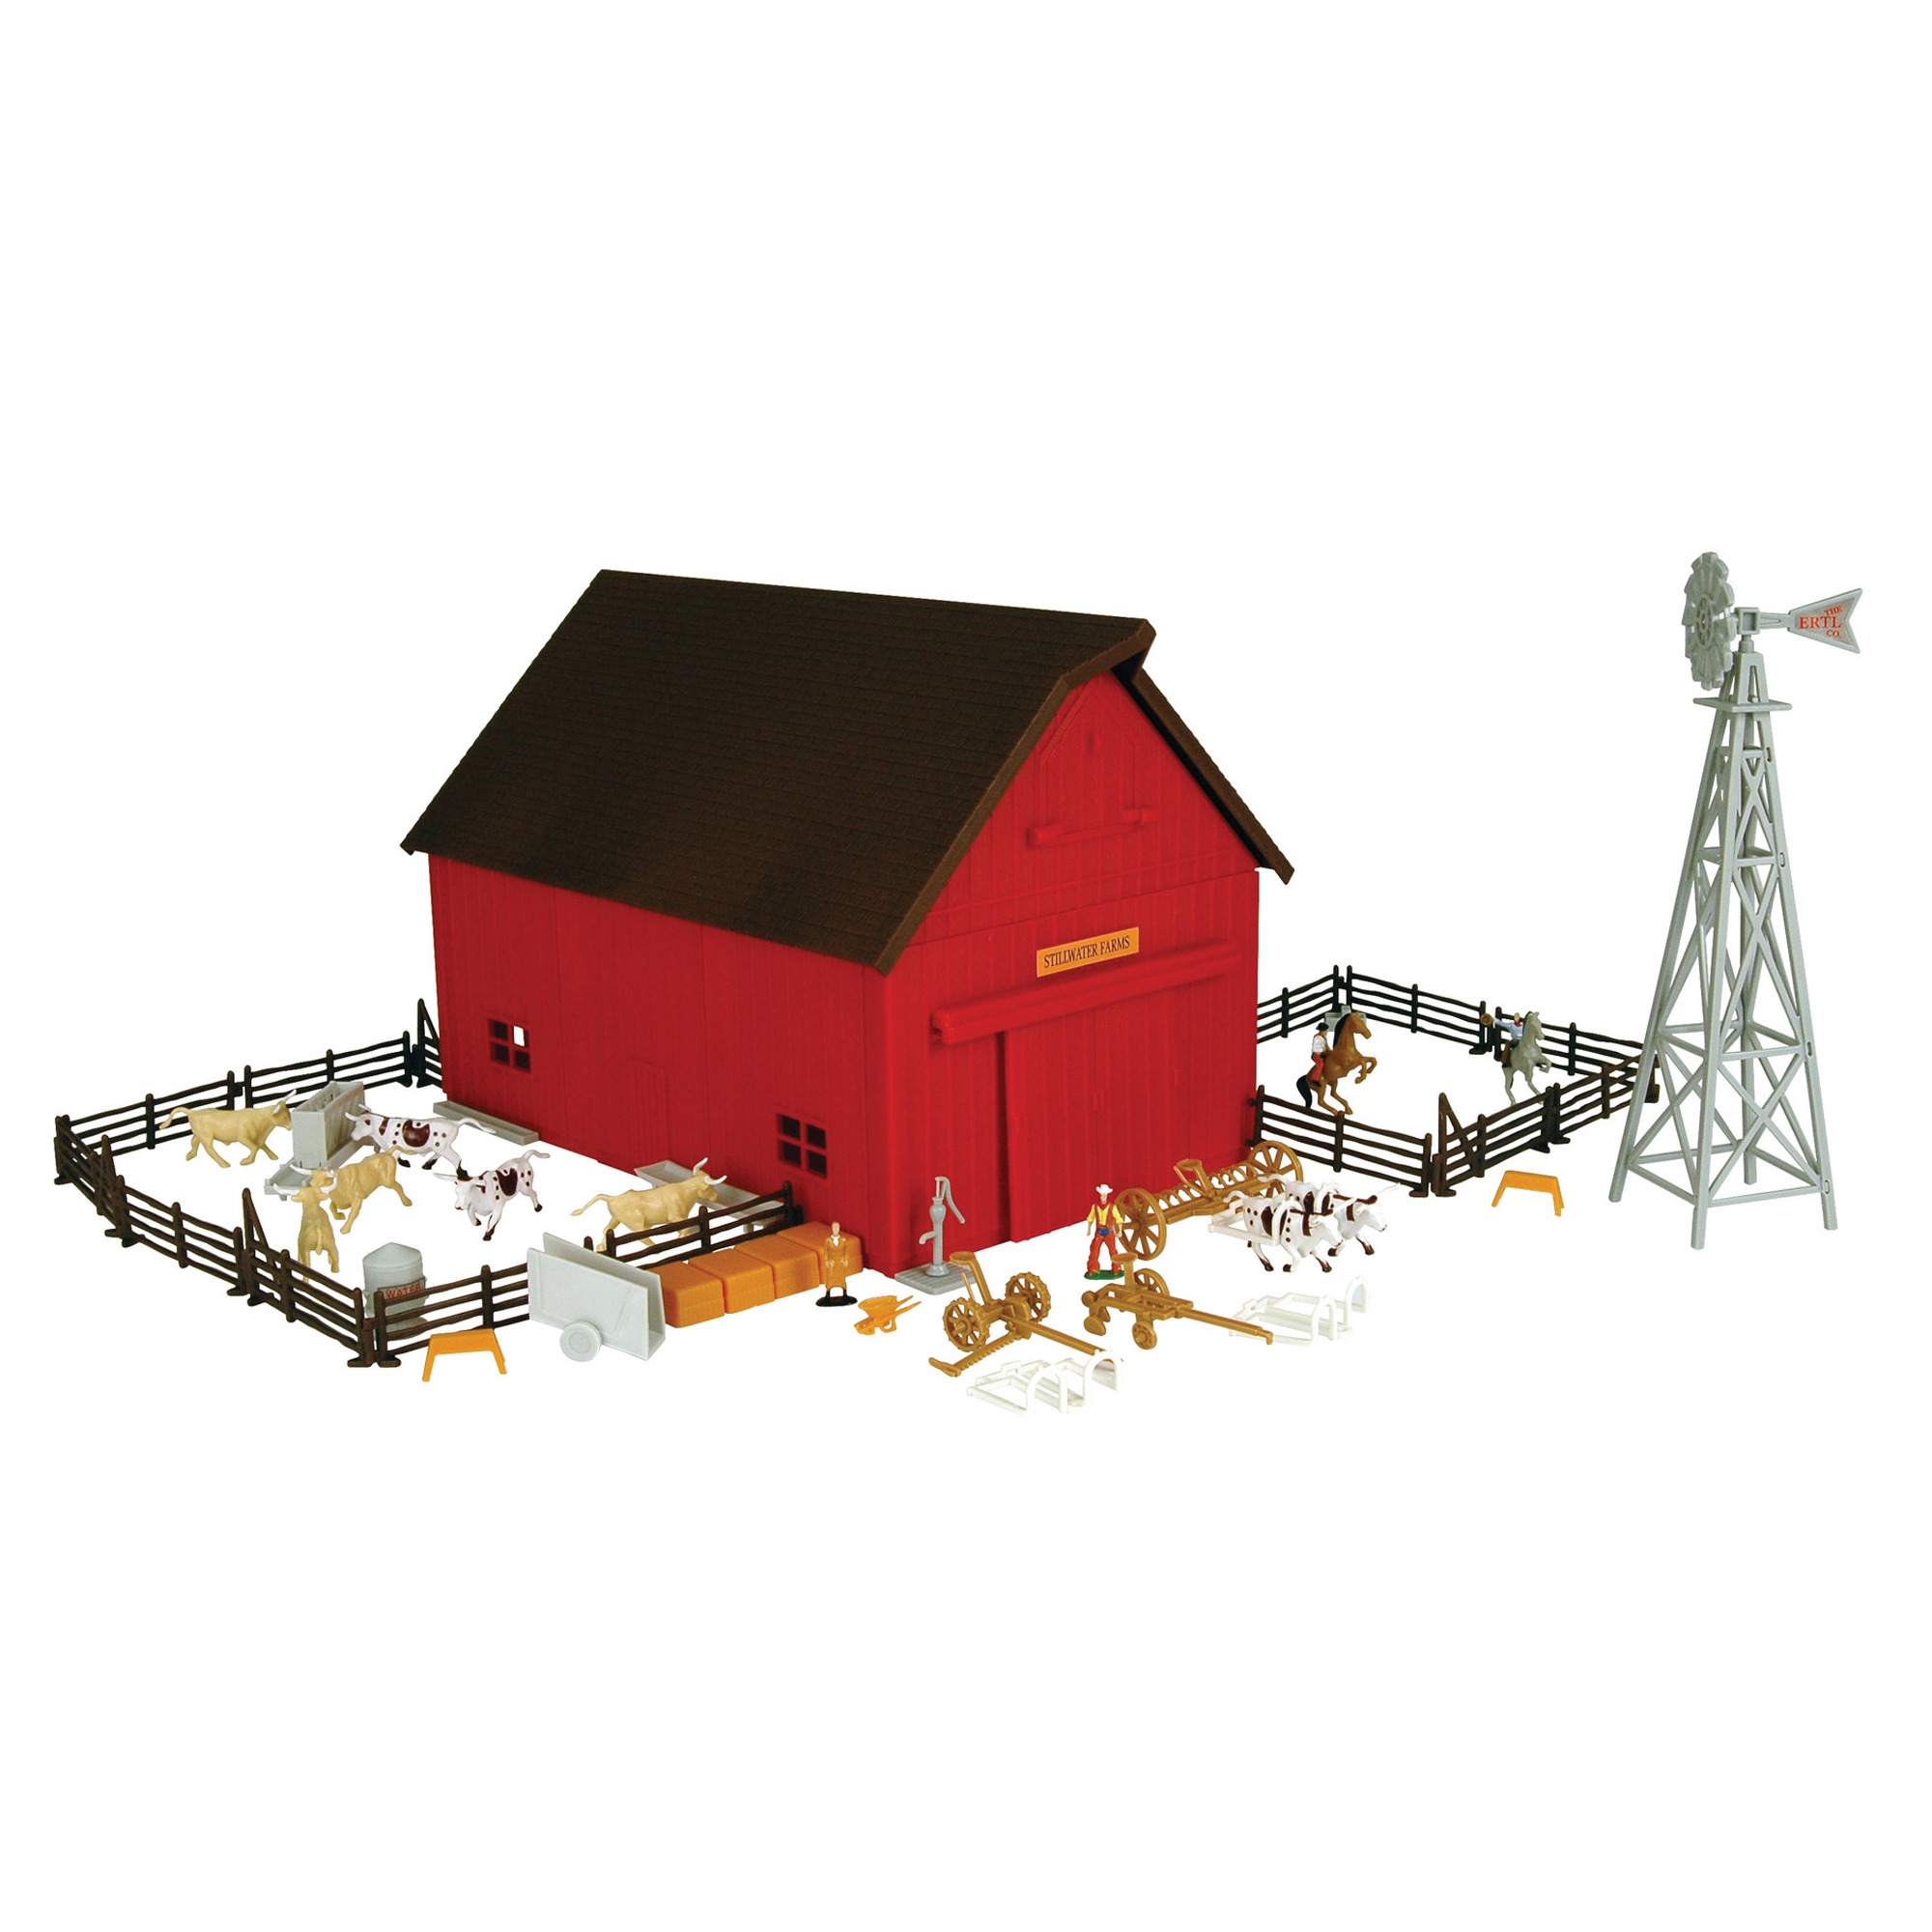 ERTL 1:64 Farm Country Western Barn Playset 1 64 Scale Buildings For Sale